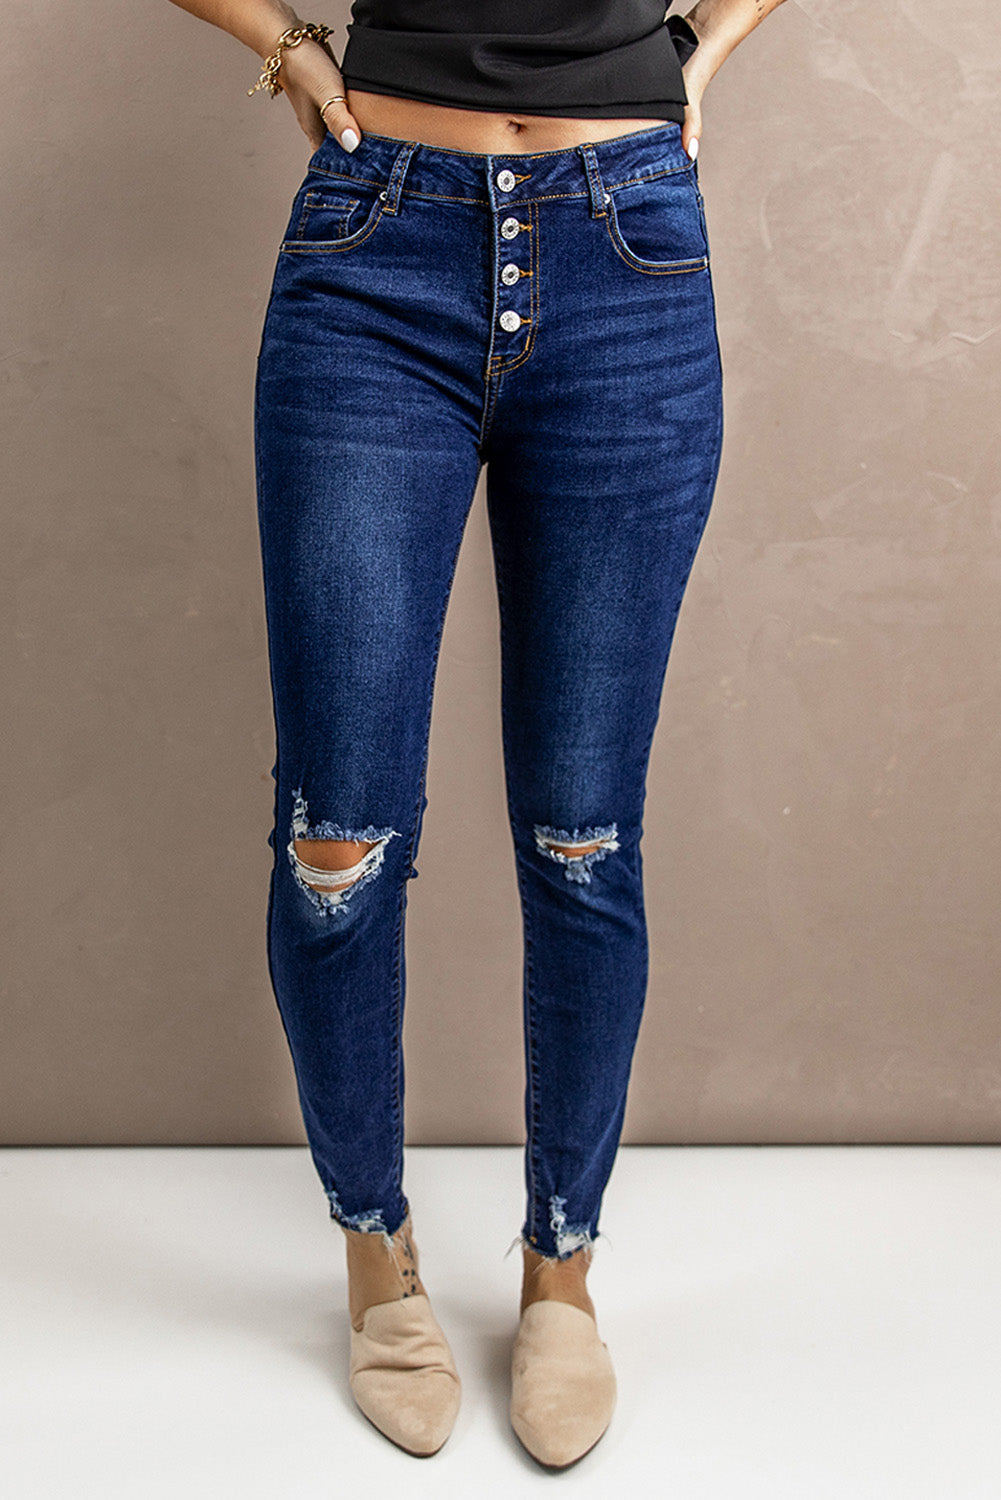 distressed-button-fly-skinny-jeans